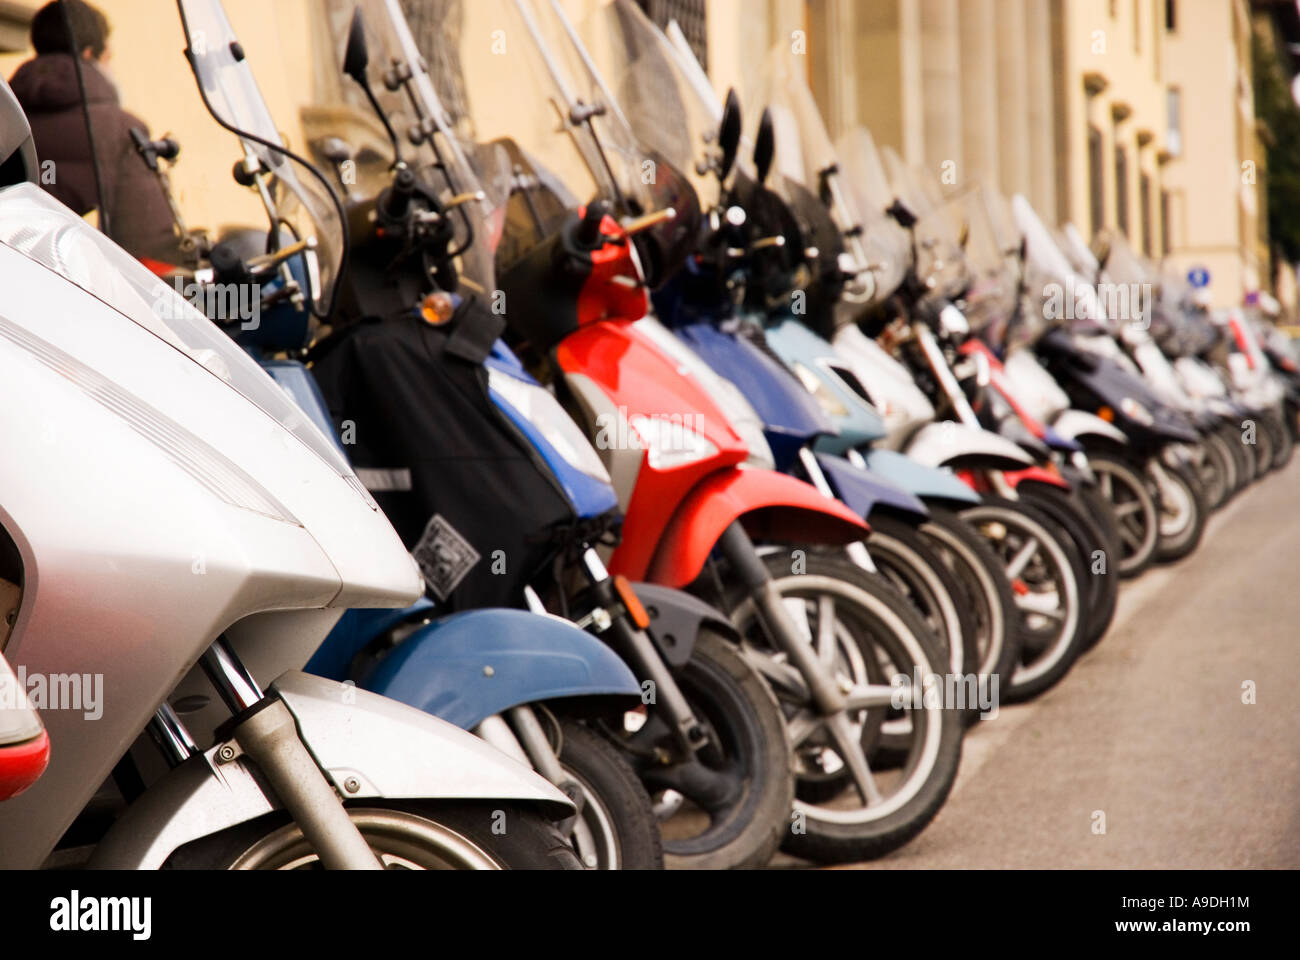 Mopeds, Florence, Italy Stock Photo